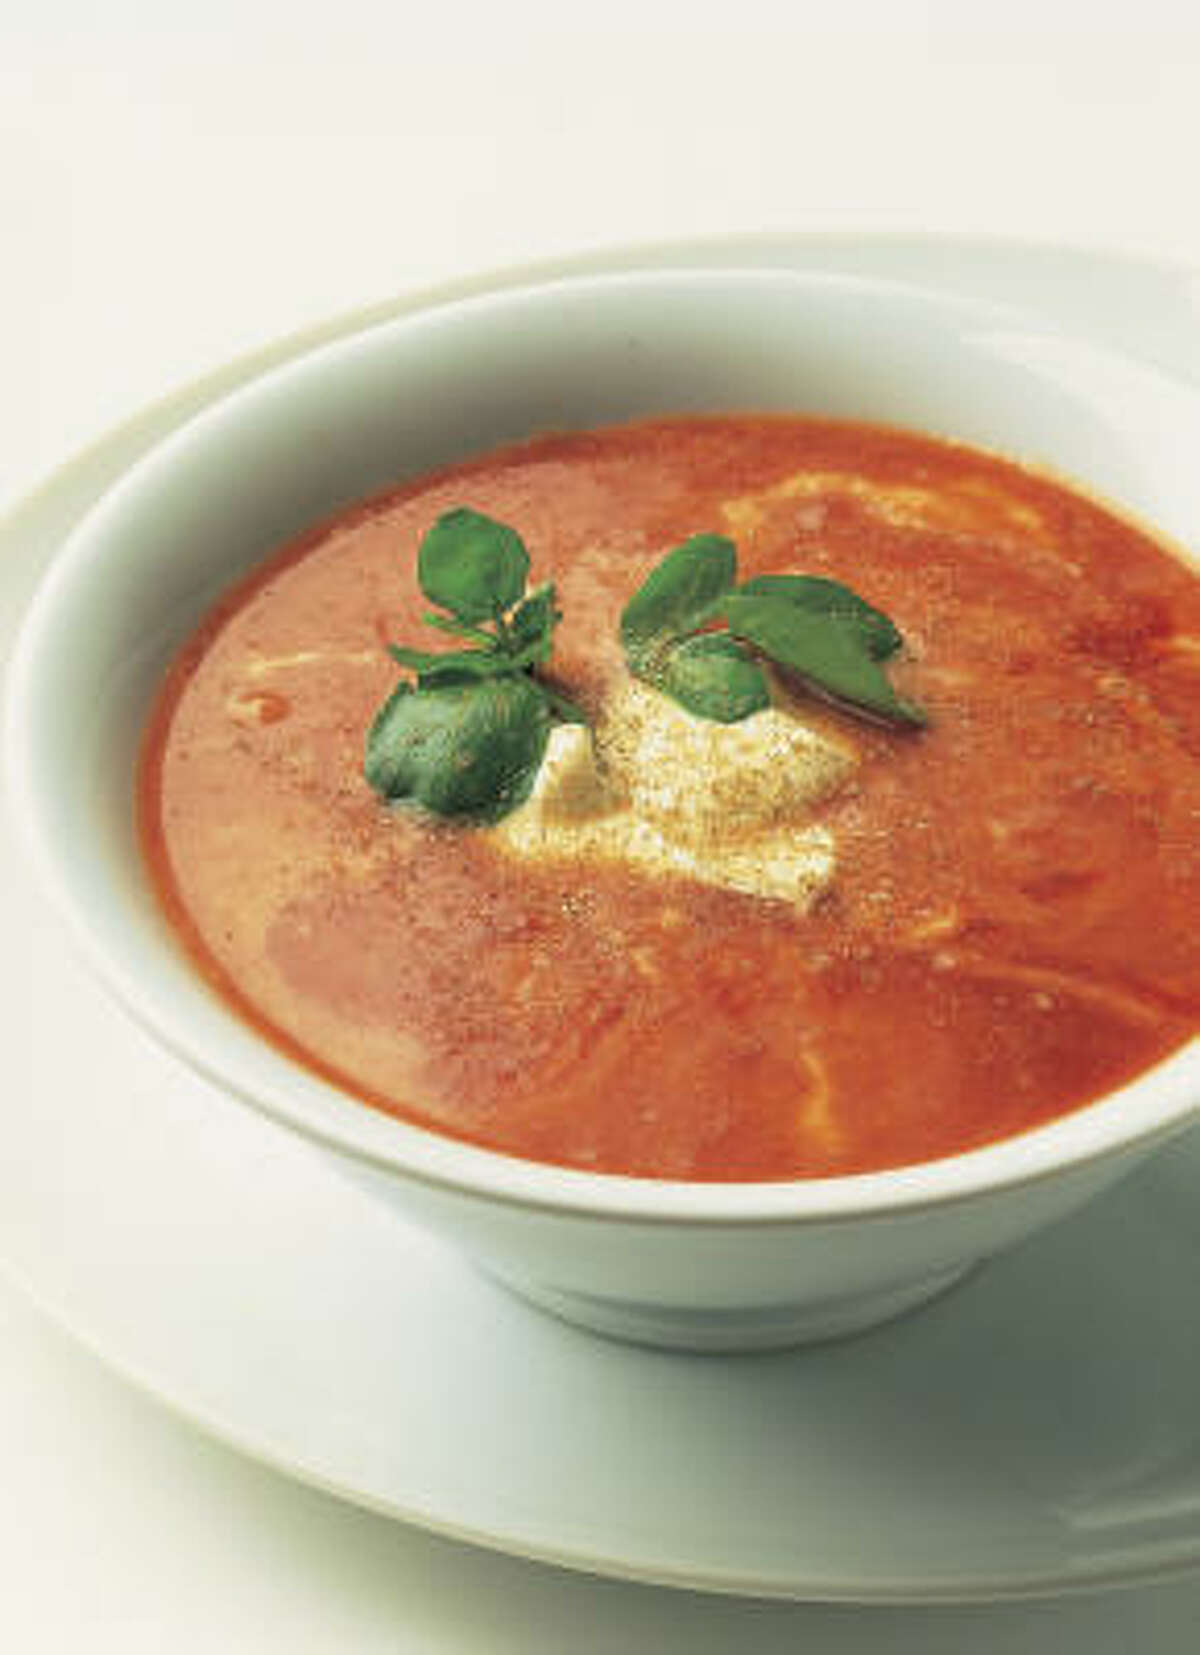 Vinegar, citrus and a splash or two of vodka round out this recipe for Bloody Mary Soup.